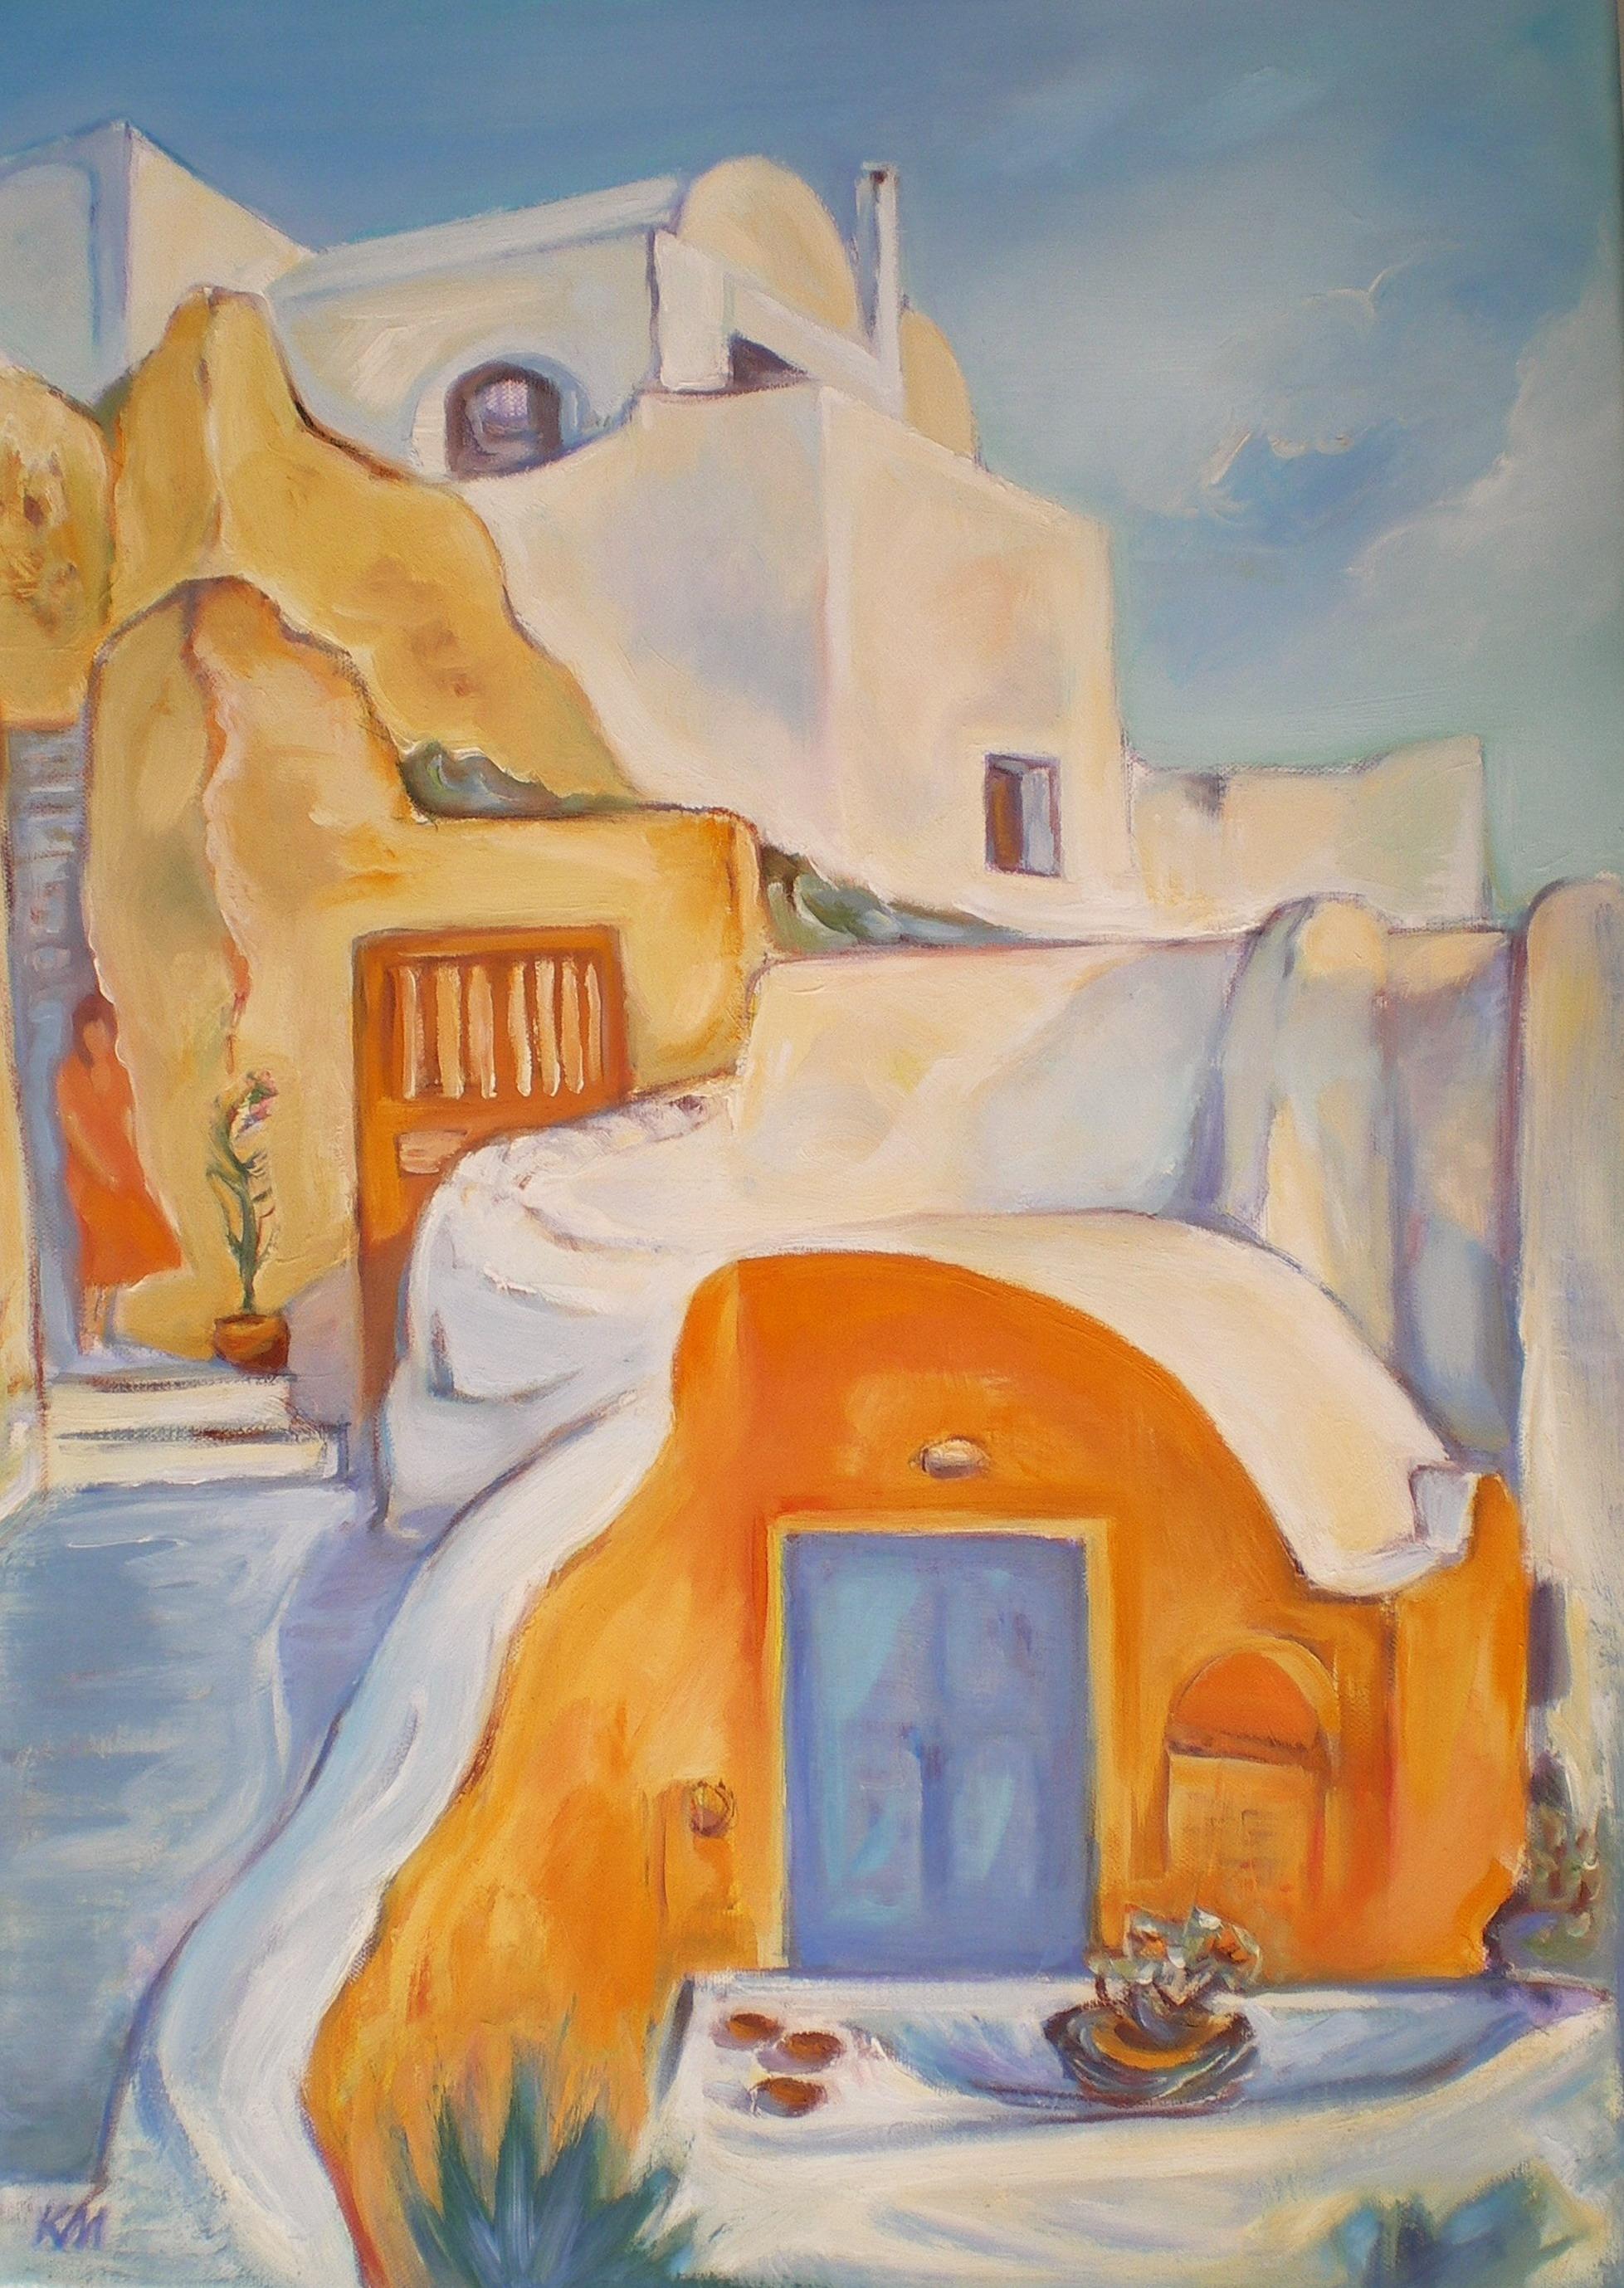 "Santorini, Exterior" is an modernist painting by Maestro Krasimira Mihaylova.

About the artwork:

TECHNIQUE:  oil painting
STYLE: Impressionist, Contemporary
Edition : Unique, signed
Weight: Approximately 2 kg.

The painting is unframed.

Frame: